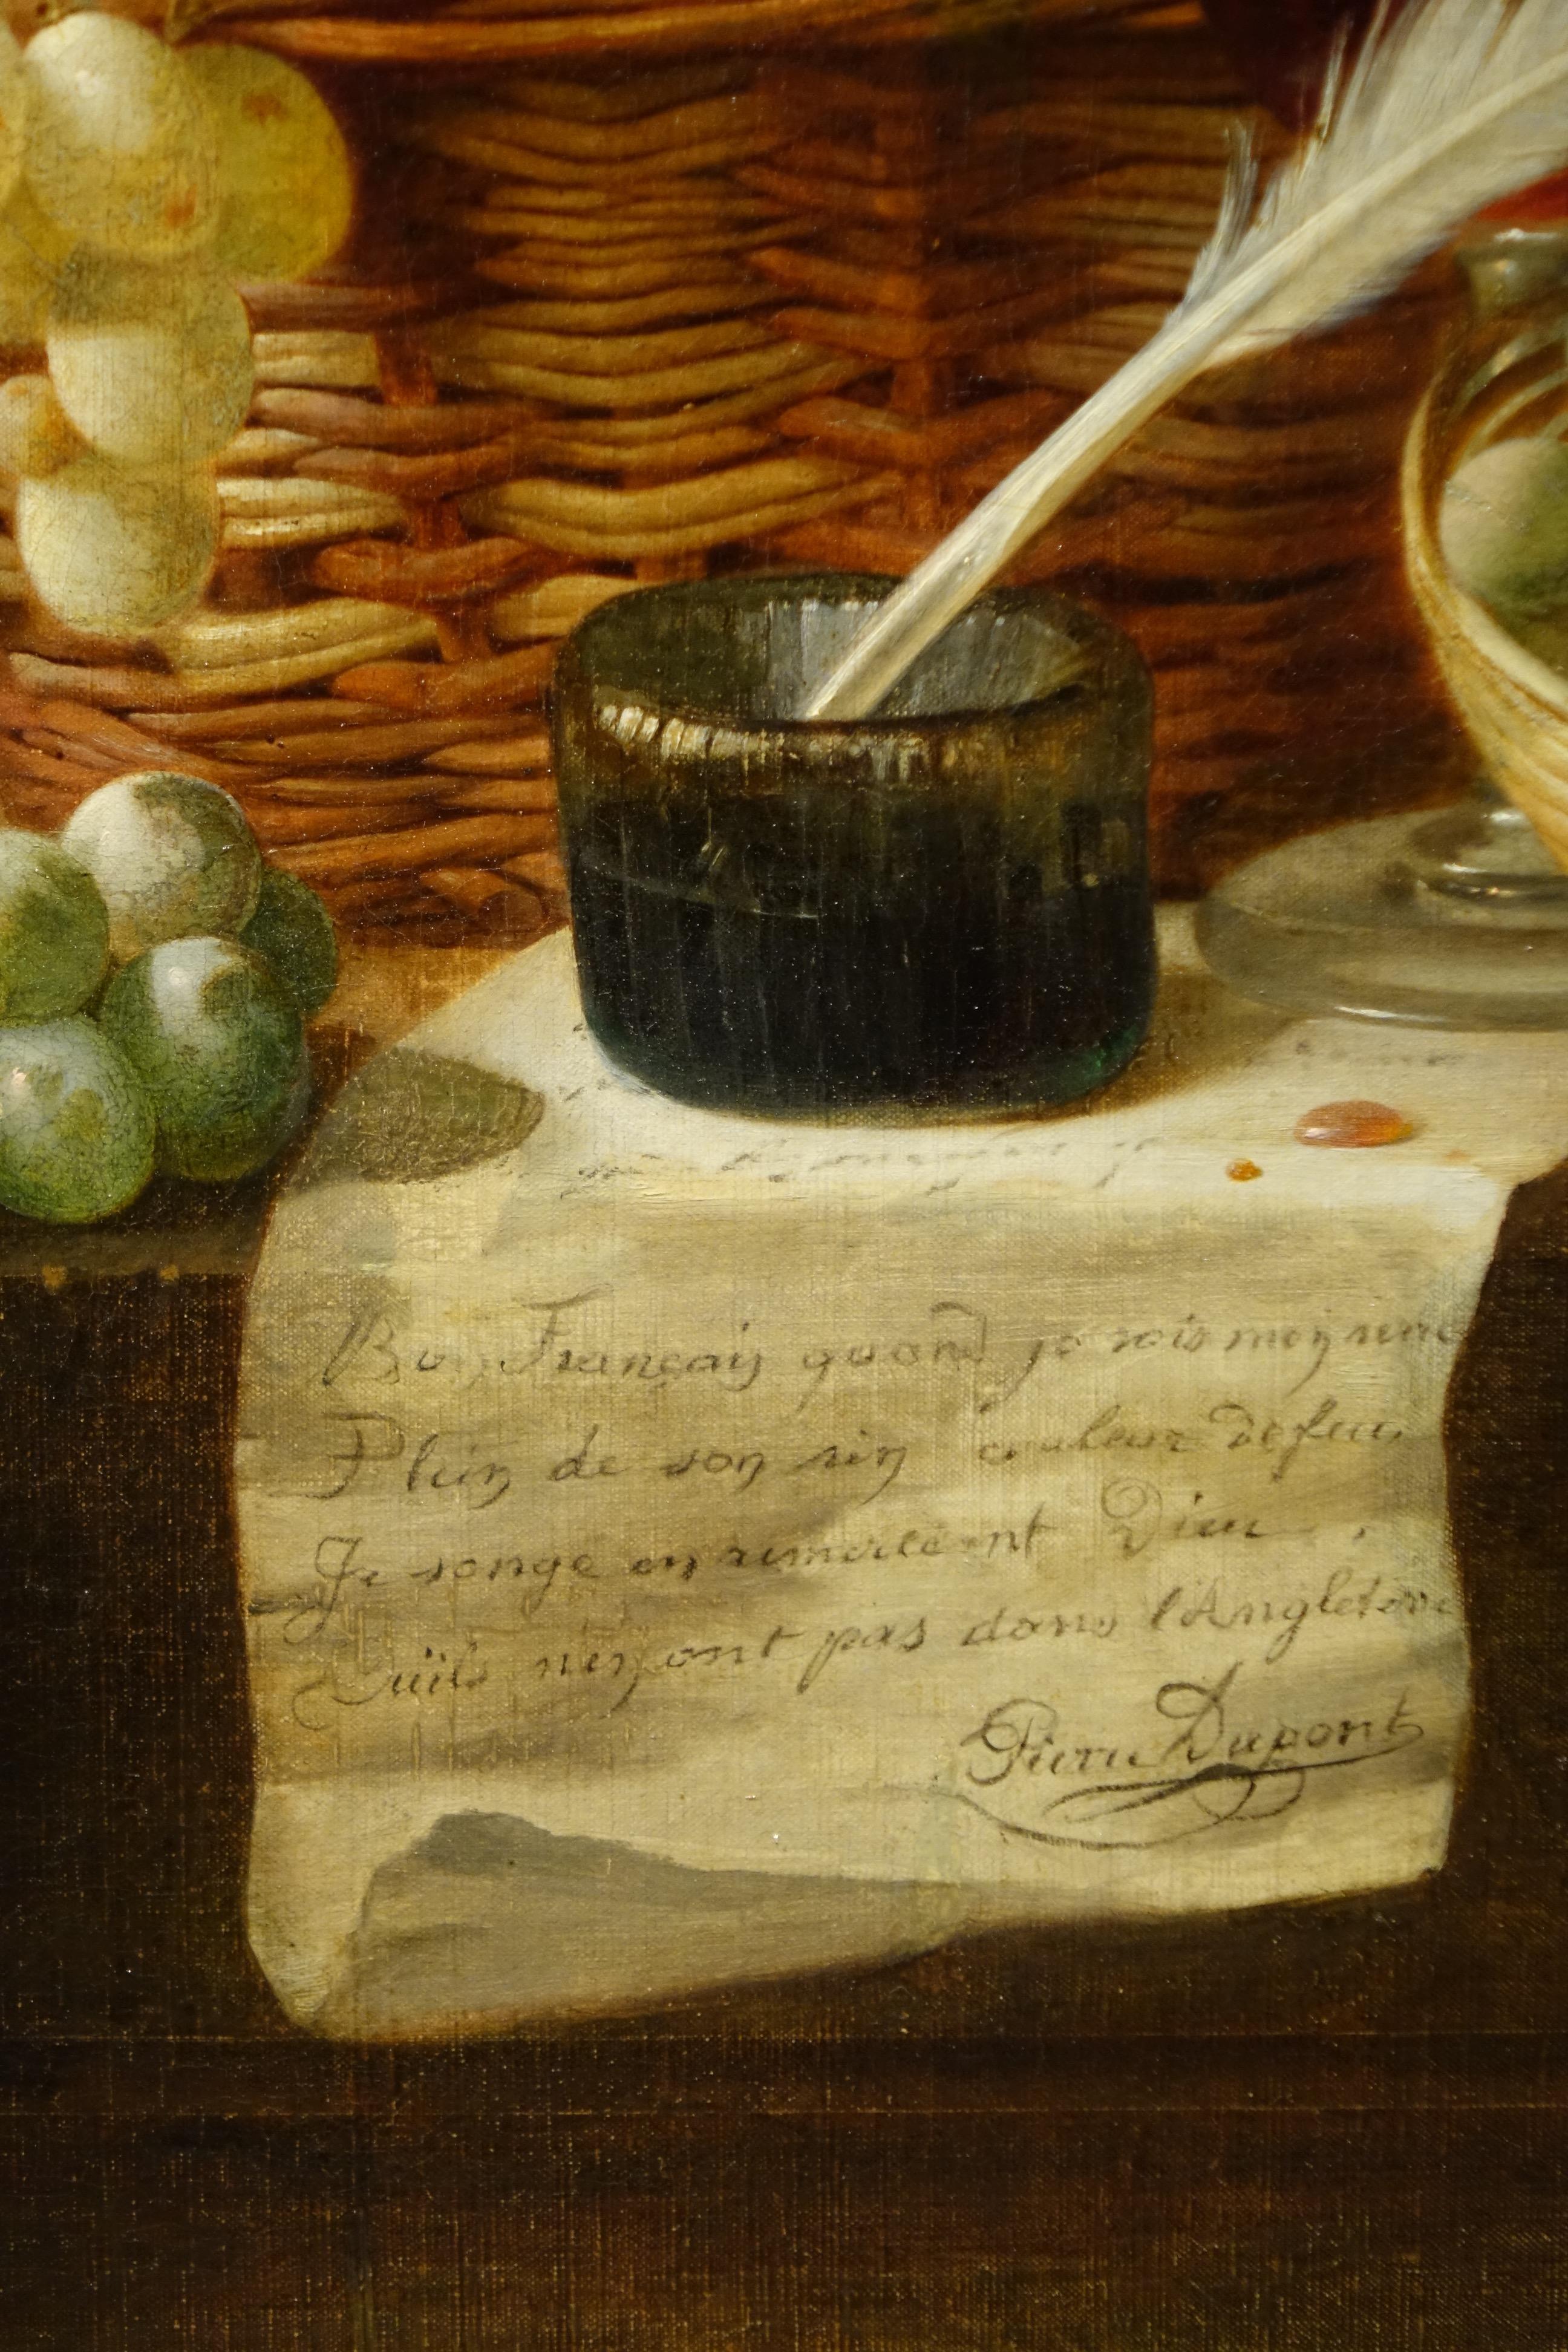 A painting, oil on canvas depicting a still life with grapes on an entablature.
White, black and rosé grapes are arranged in two wicker baskets, with vine leaves.
In the center an inkwell with a feather and a paper unrolled on which is written the